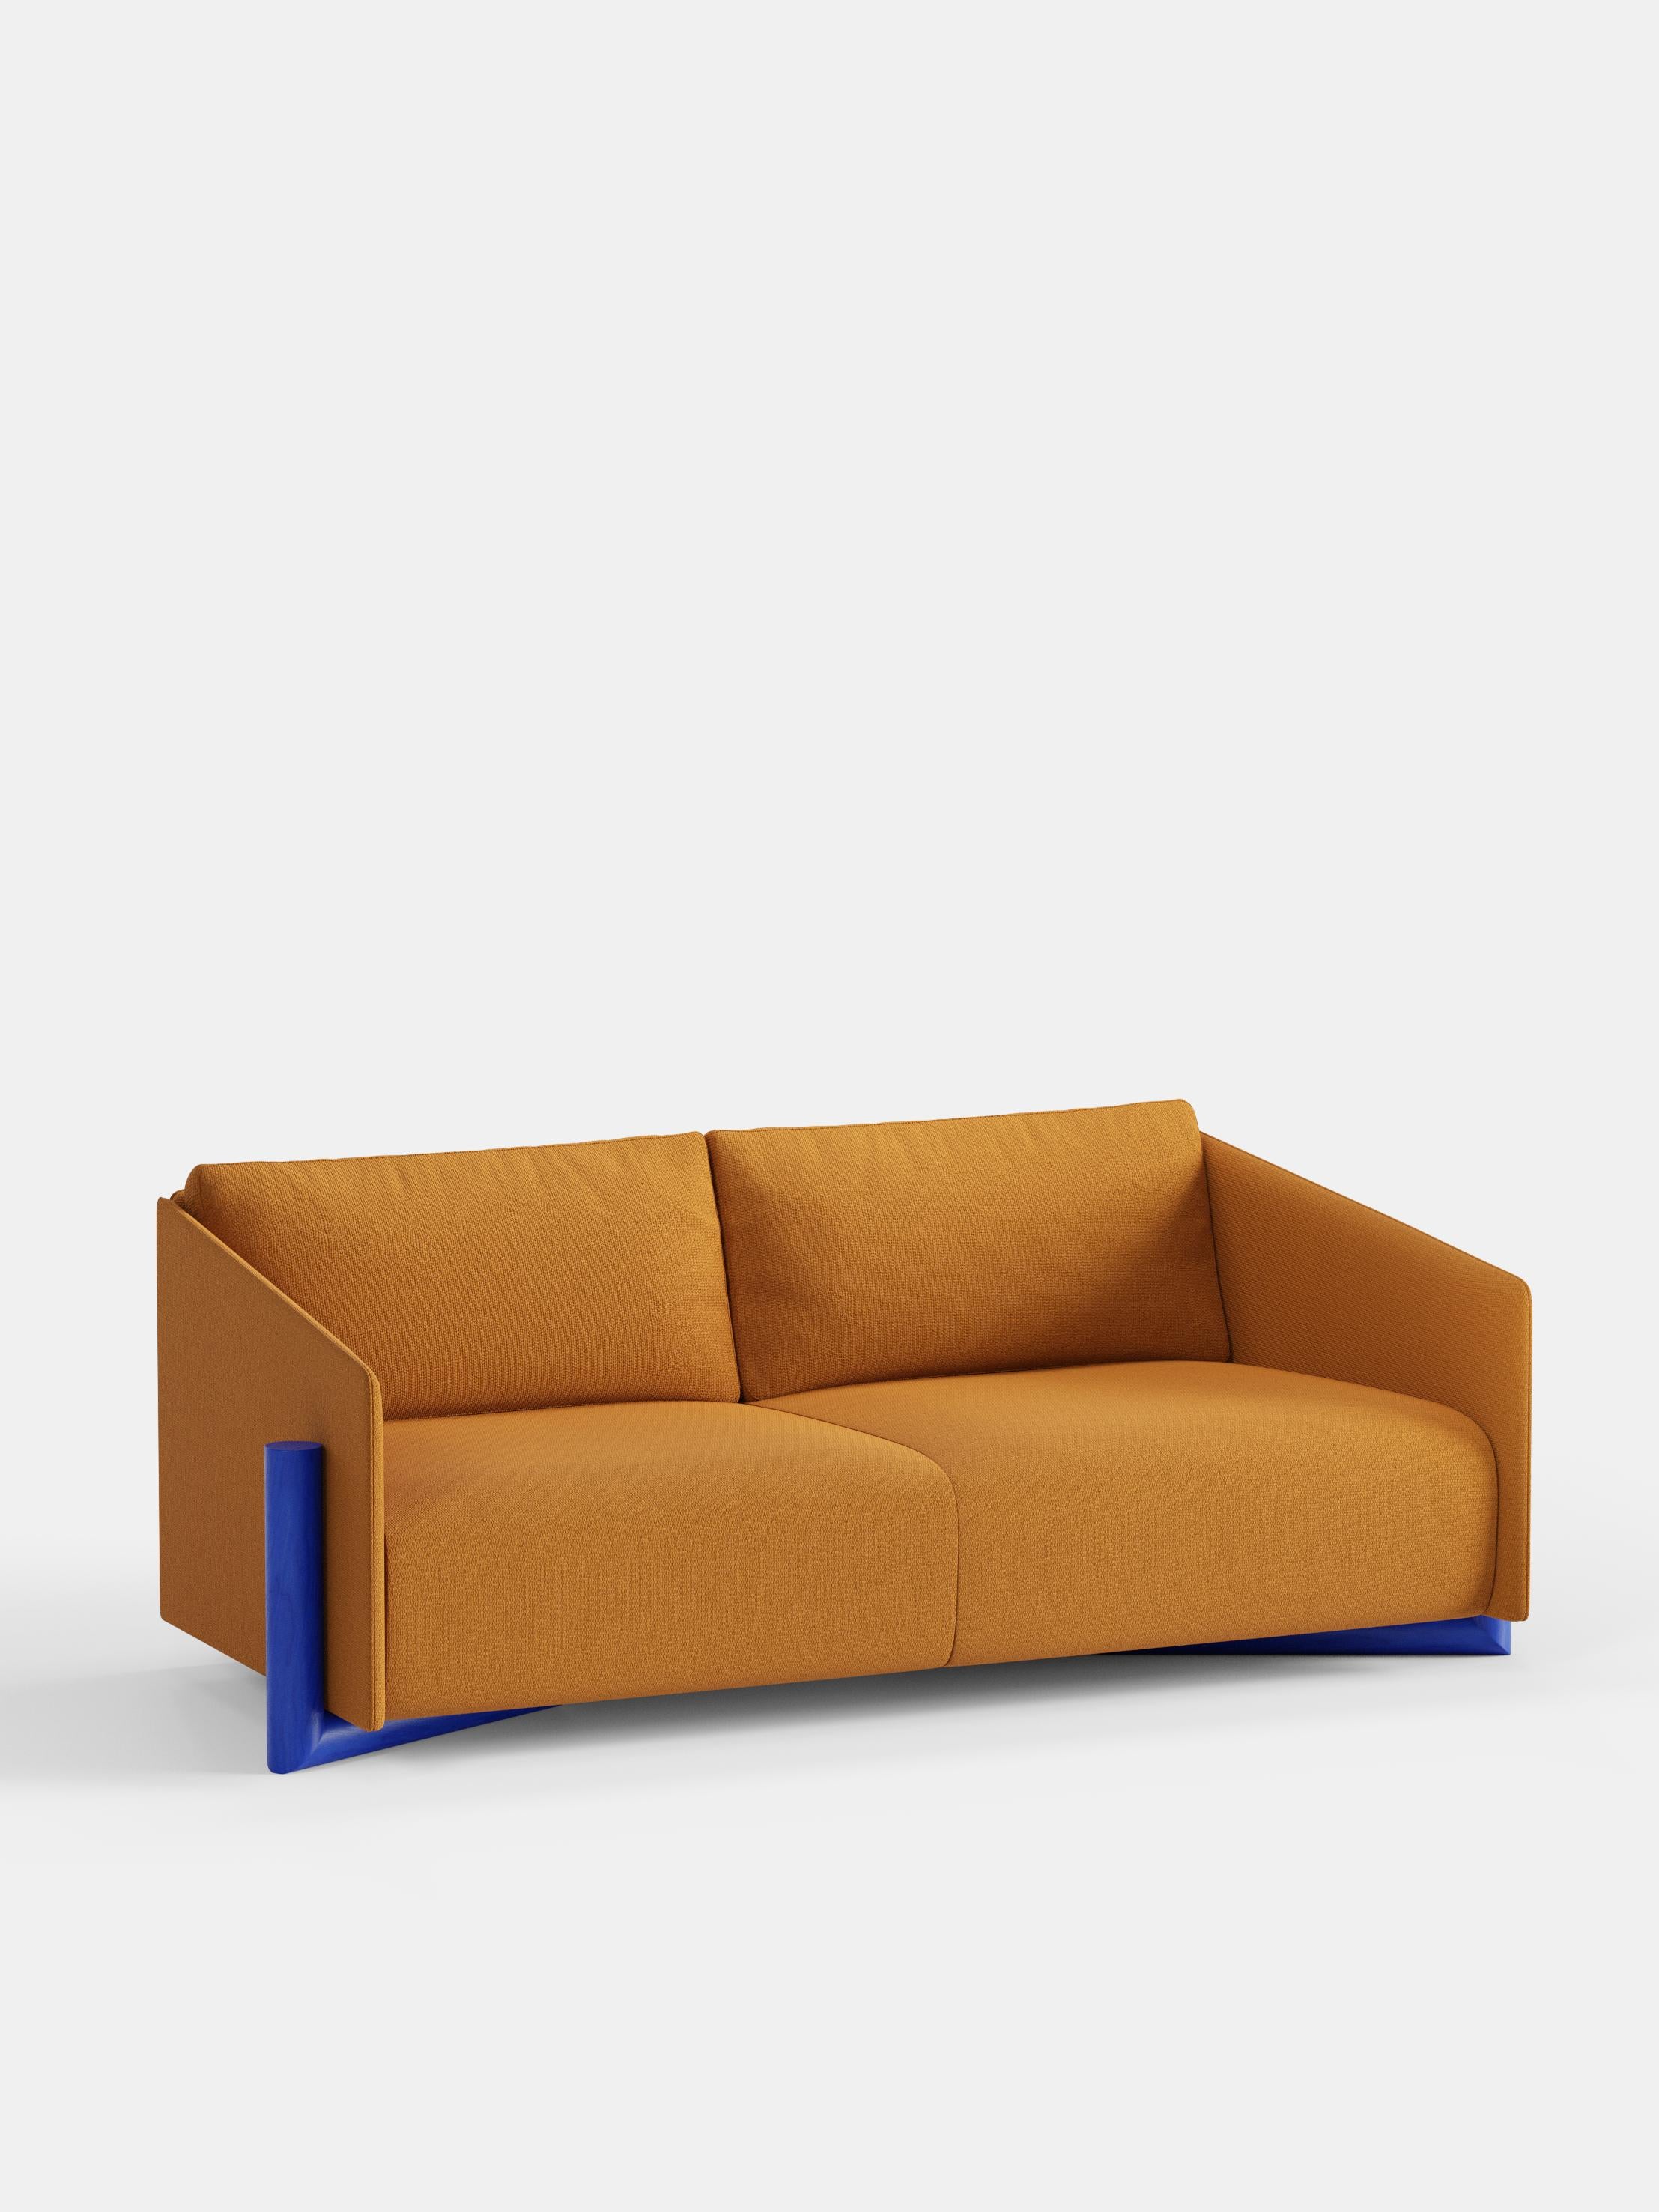 Mustard Timber 3 Seater Sofa by Kann Design
Dimensions: D 104.5 x W 200 x H 75 cm.
Materials: Solid wood, elastic belts, HR foam, fabric upholstery Kvadrat Vidar 472 (94% wool, 6% nylon).
Available in other fabrics.

The strong presence of textile